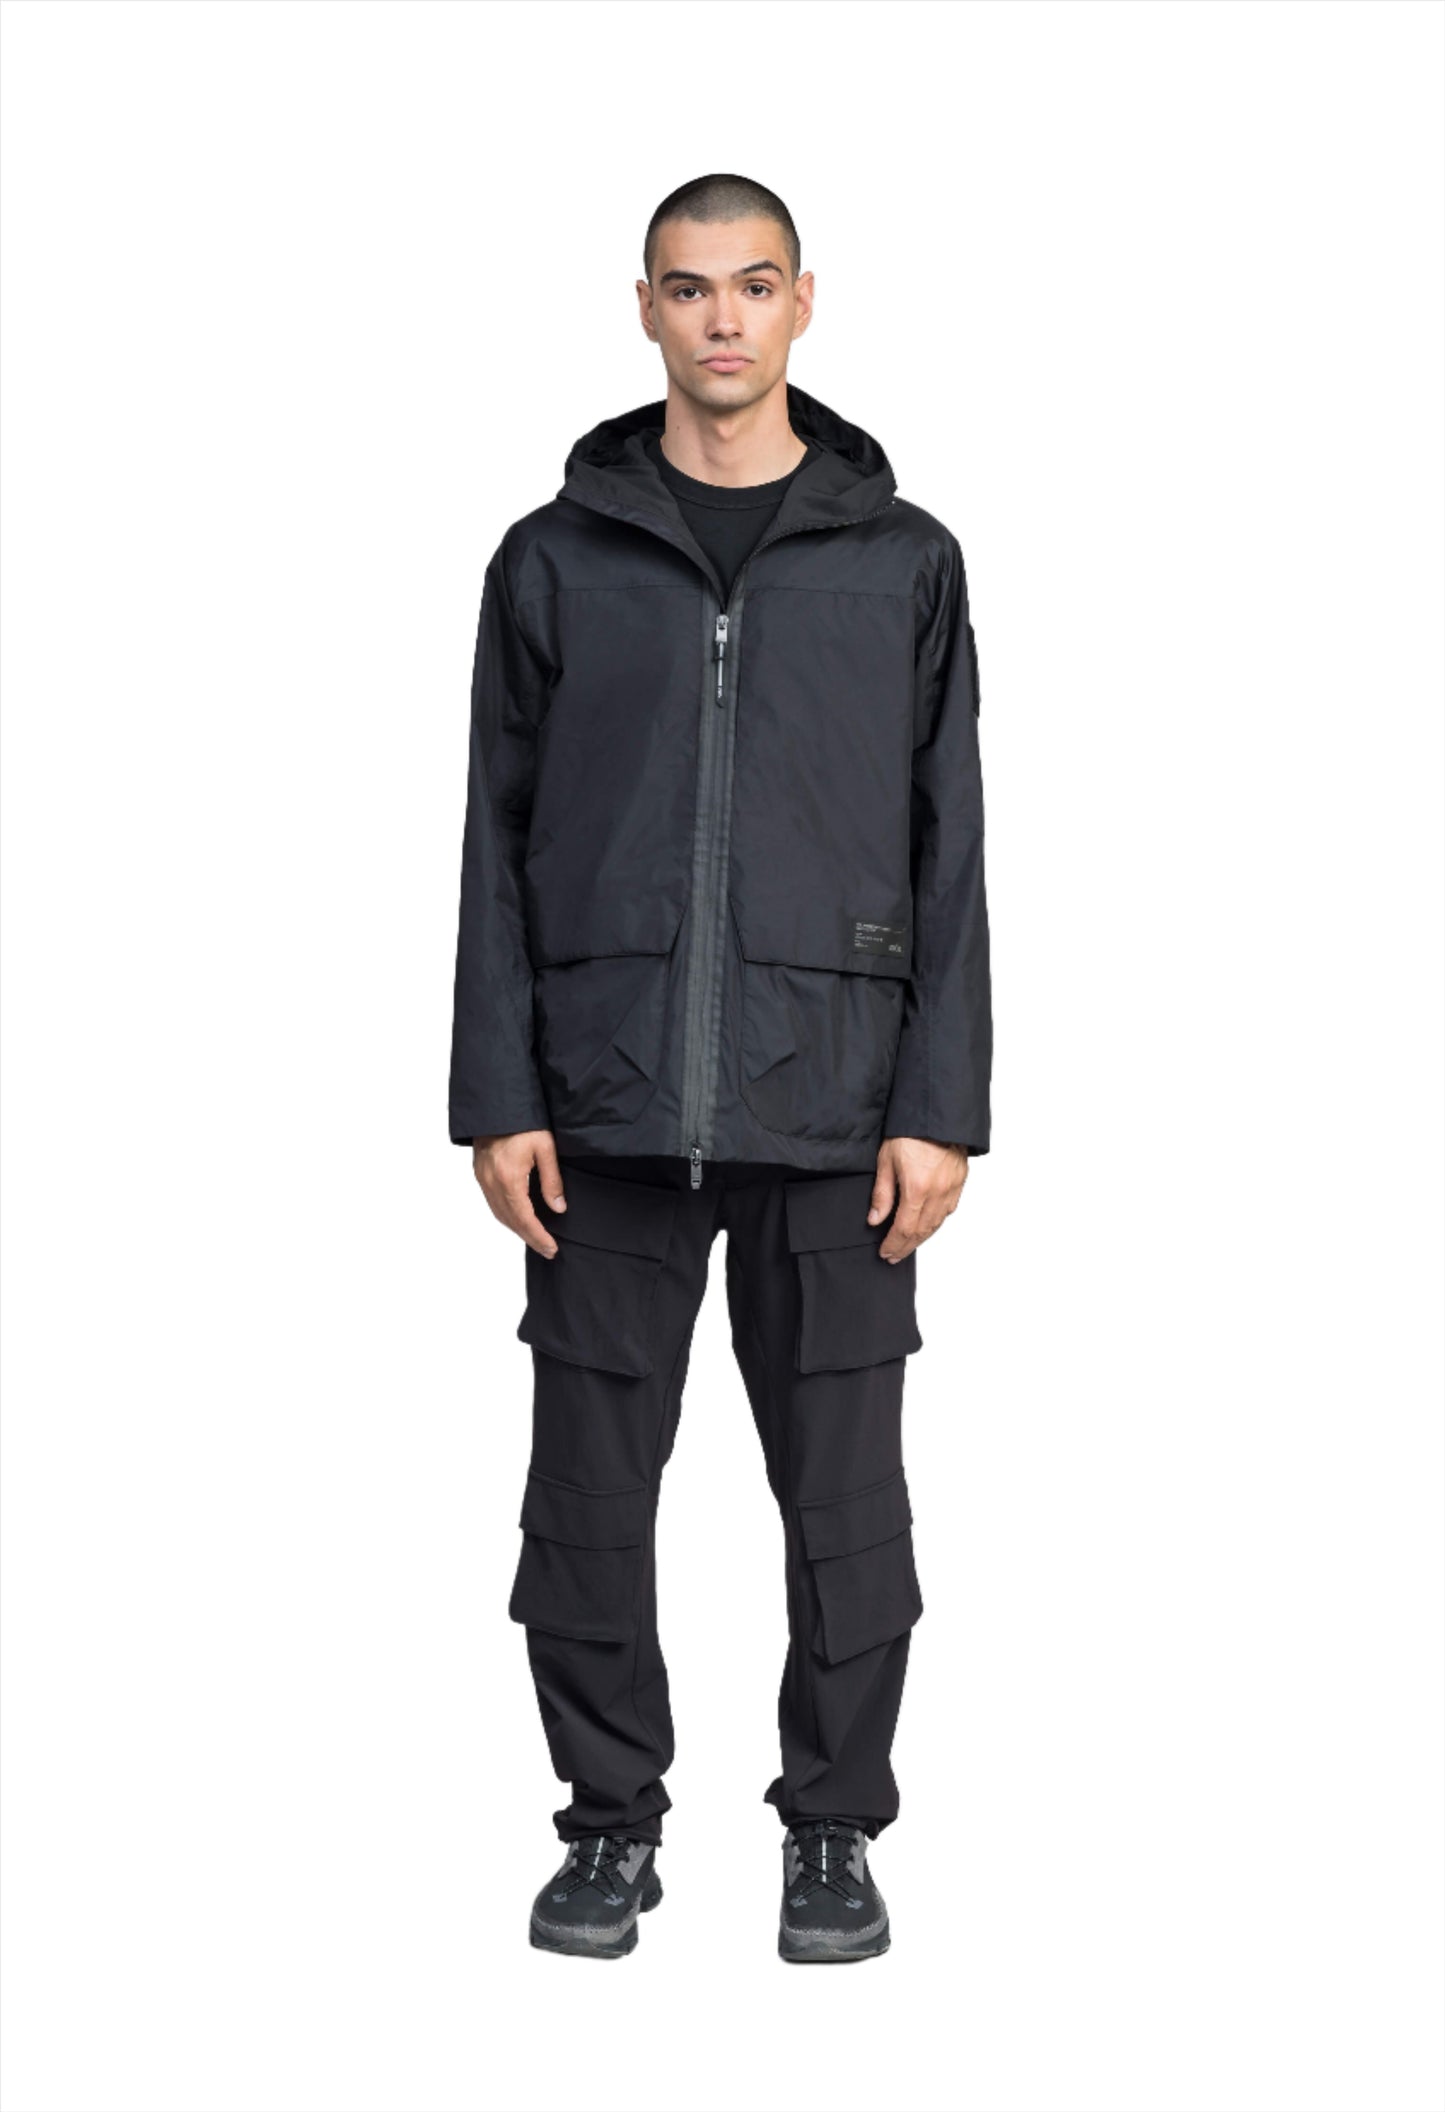 Mission Men's Performance Rain Shell Jacket in hip length, non-removable hood with adjustable toggle, two-way waterproof zipper, flap closure waist pockets with additional side entry storage, zipper ventilation on back, passive underarm ventilation, and breathable mesh lining, in Black